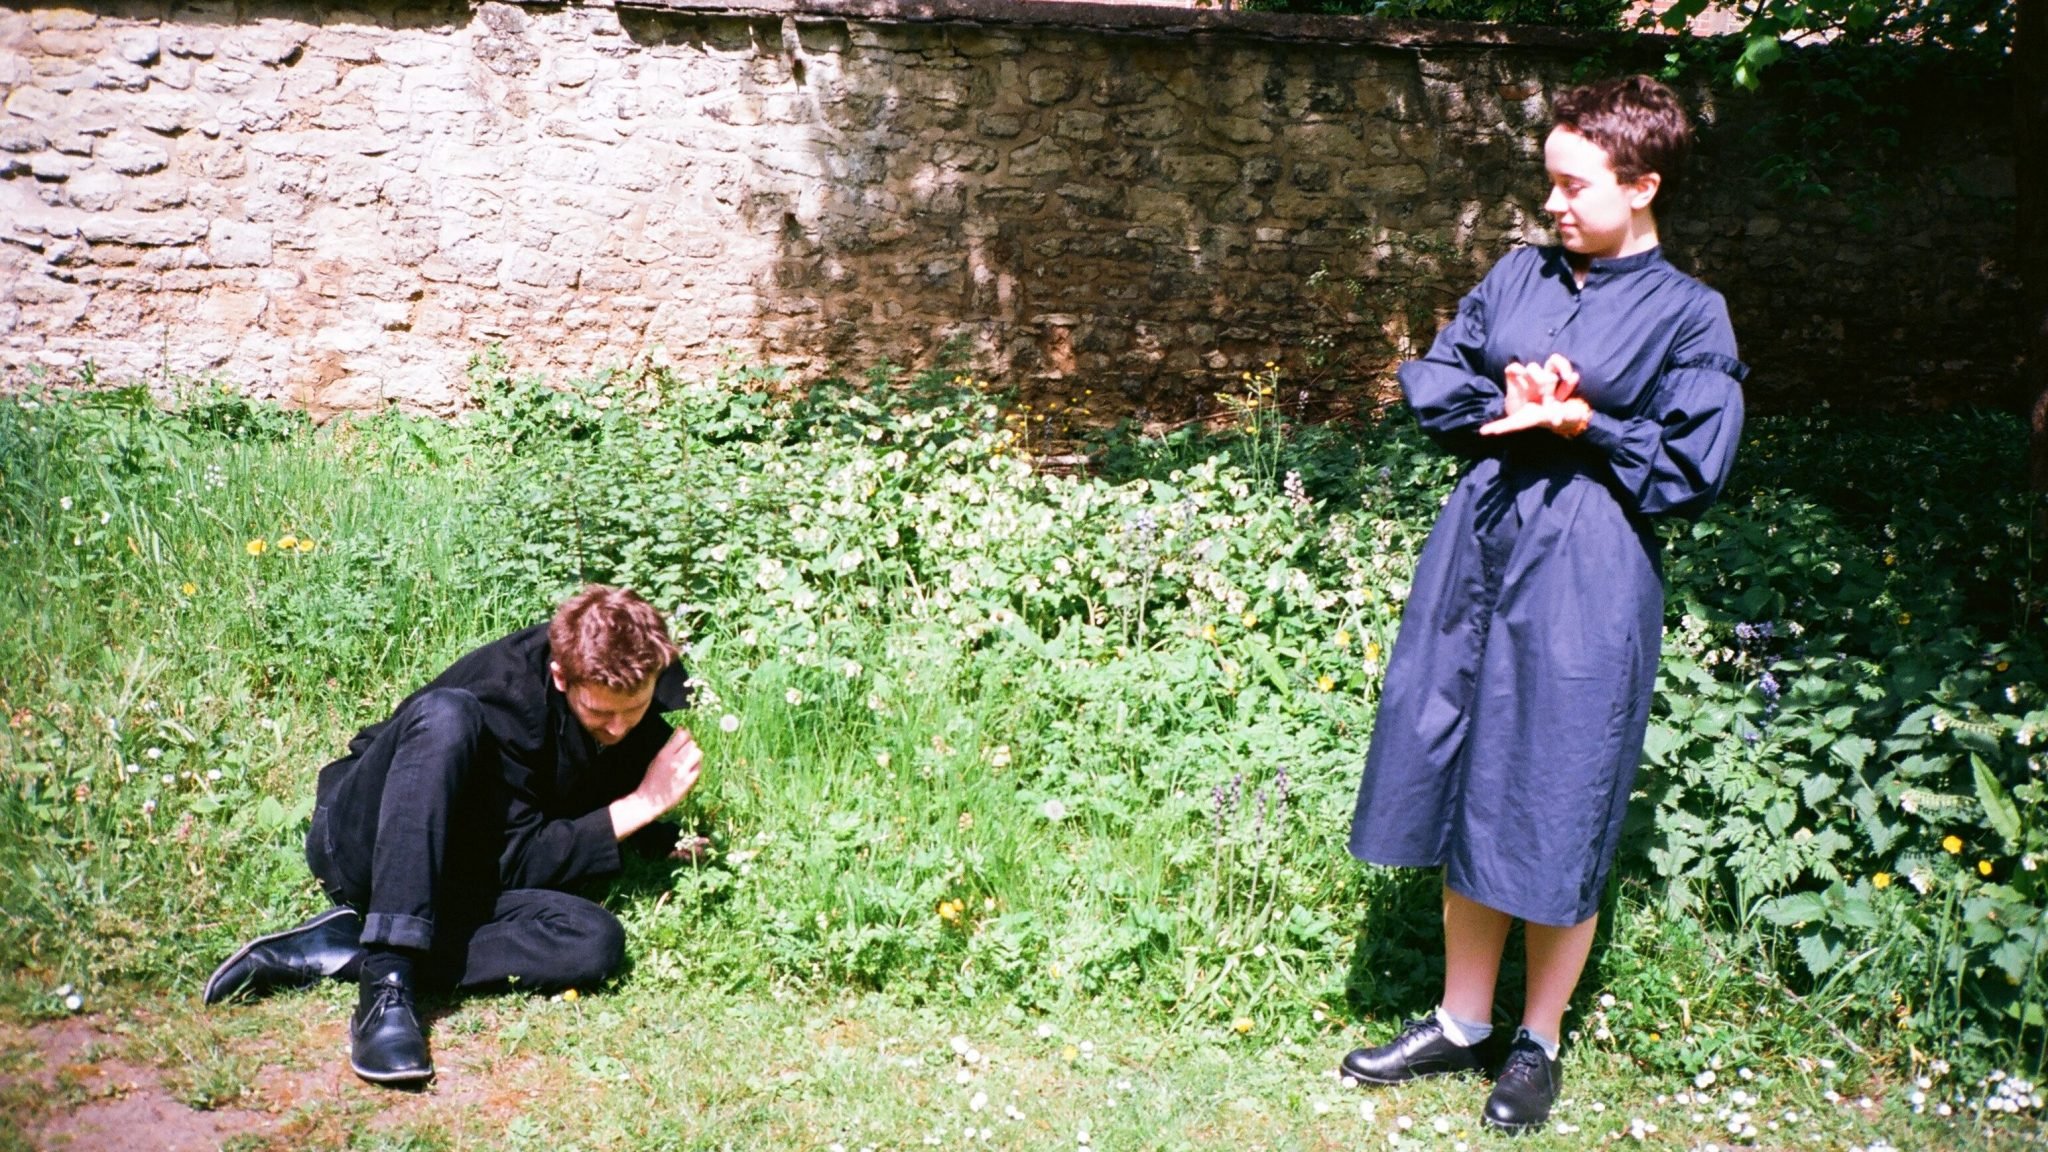 A man huddles on the grass with a woman looking over him